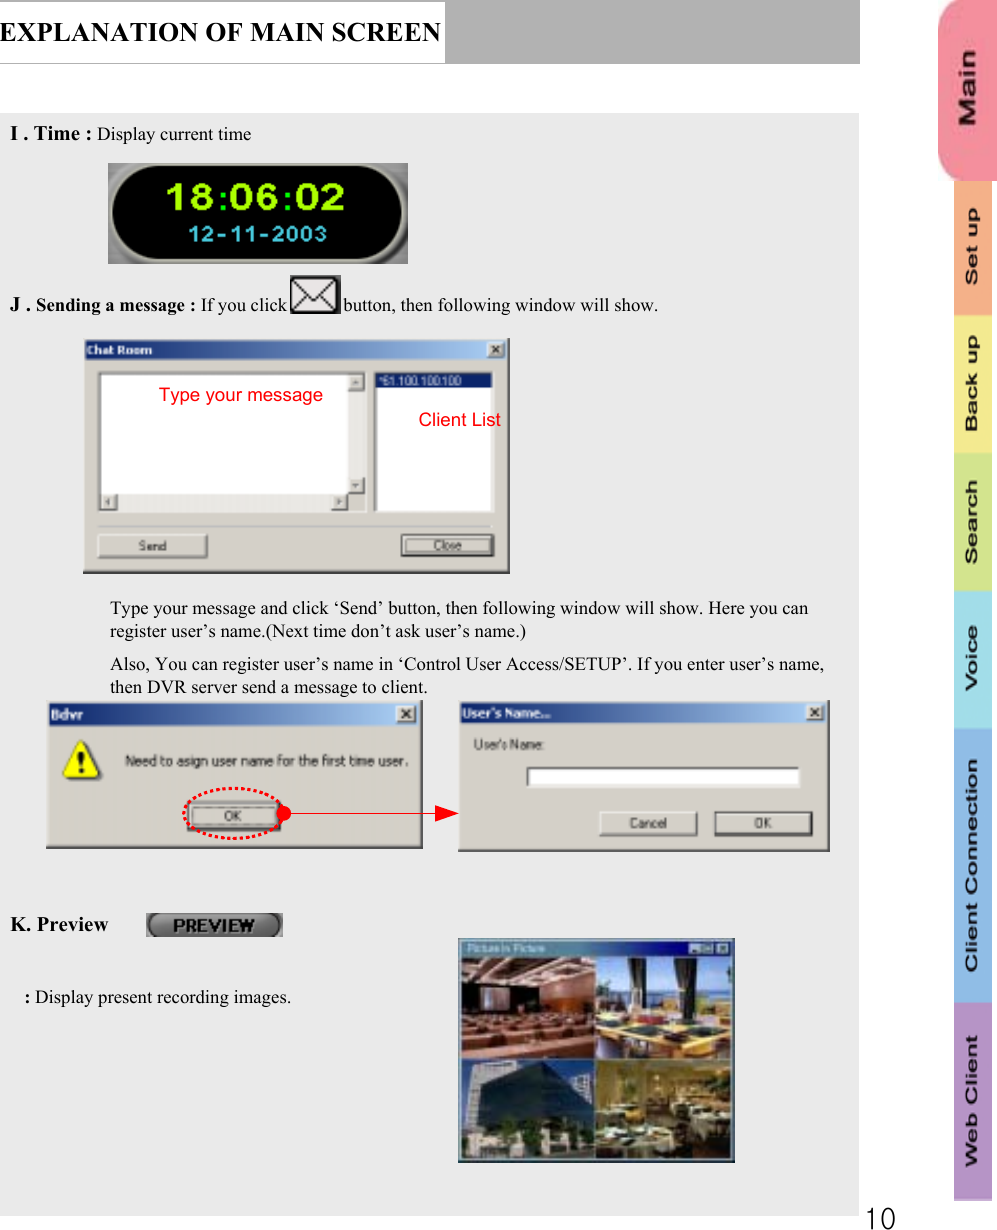 10EXPLANATION OF MAIN SCREENI . Time : Display current timeJ . Sending a message : If you click            button, then following window will show.Type your message and click ‘Send’ button, then following window will show. Here you can register user’s name.(Next time don’t ask user’s name.)Also, You can register user’s name in ‘Control User Access/SETUP’. If you enter user’s name, then DVR server send a message to client.K. Preview : Display present recording images.Type your messageClient List 